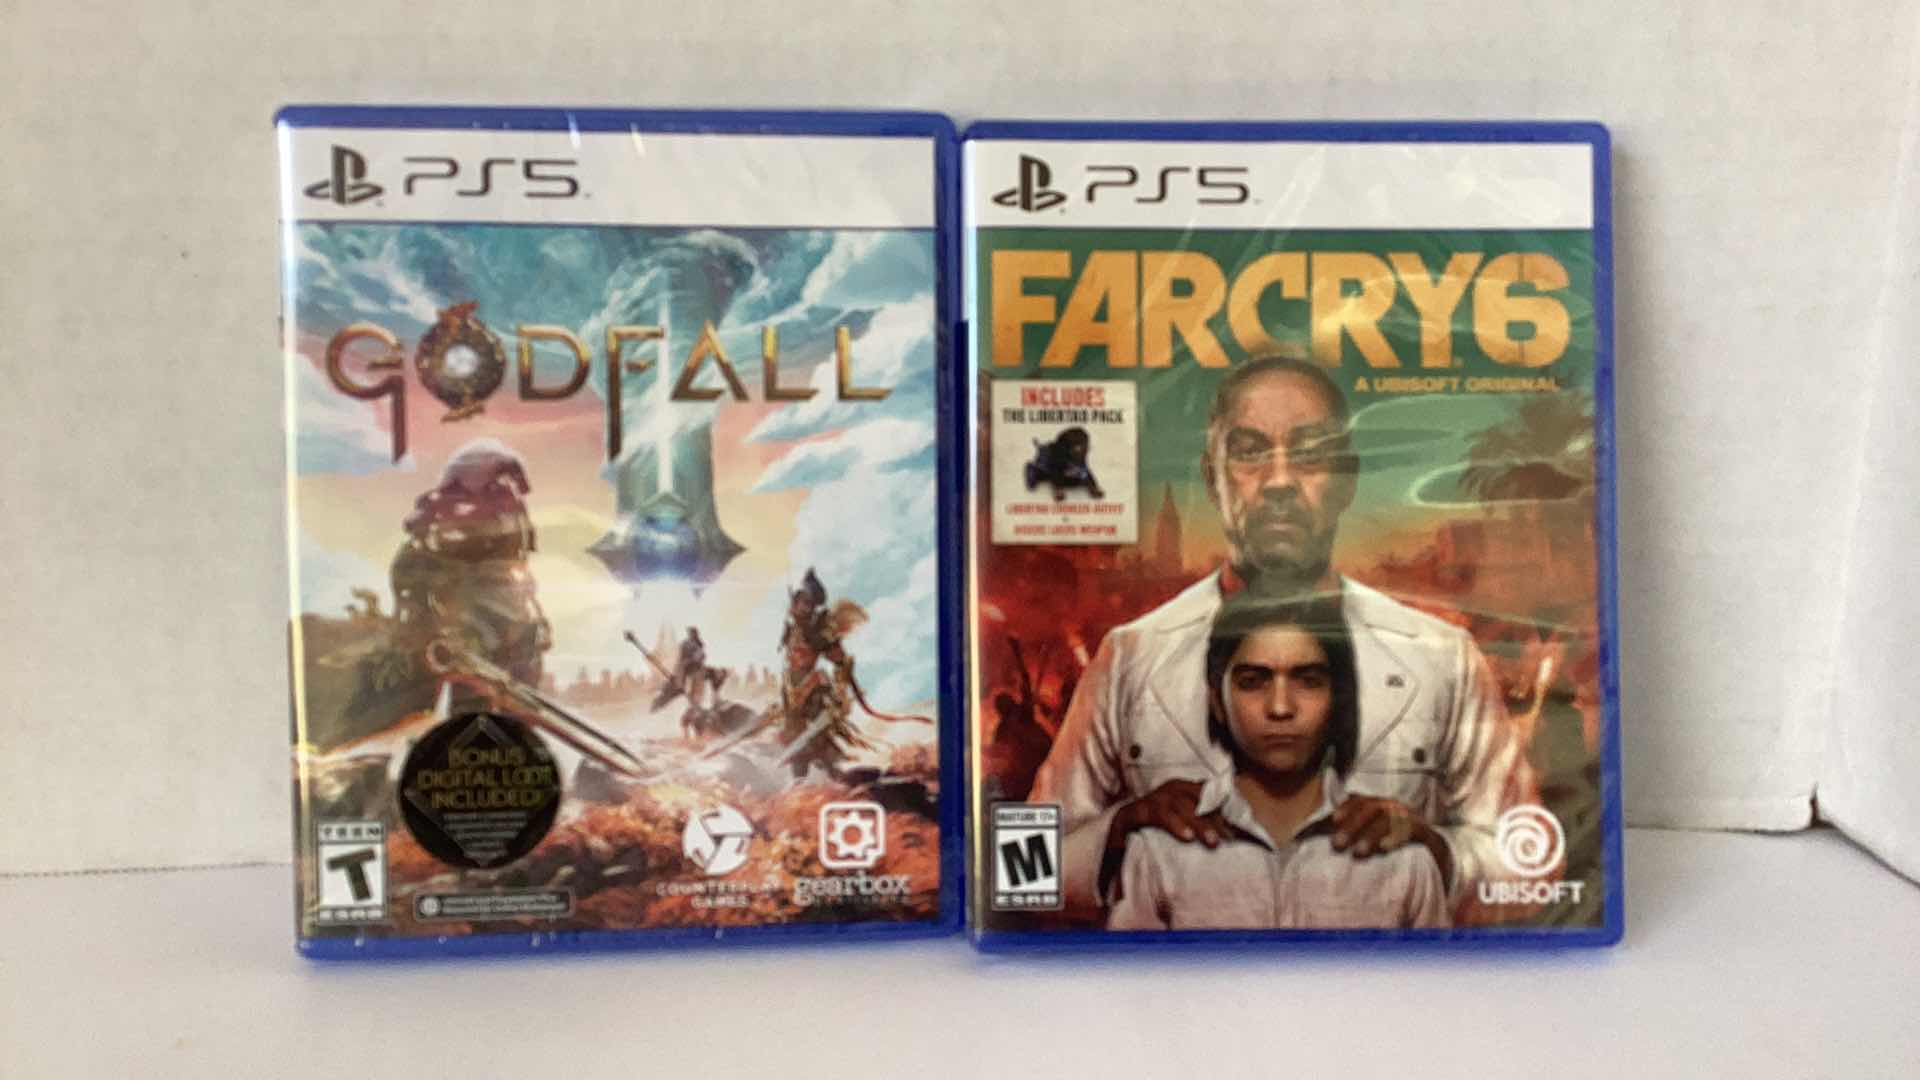 Photo 1 of 2 NEW PS5 GAMES: GODFALL AND FAR CRY 6